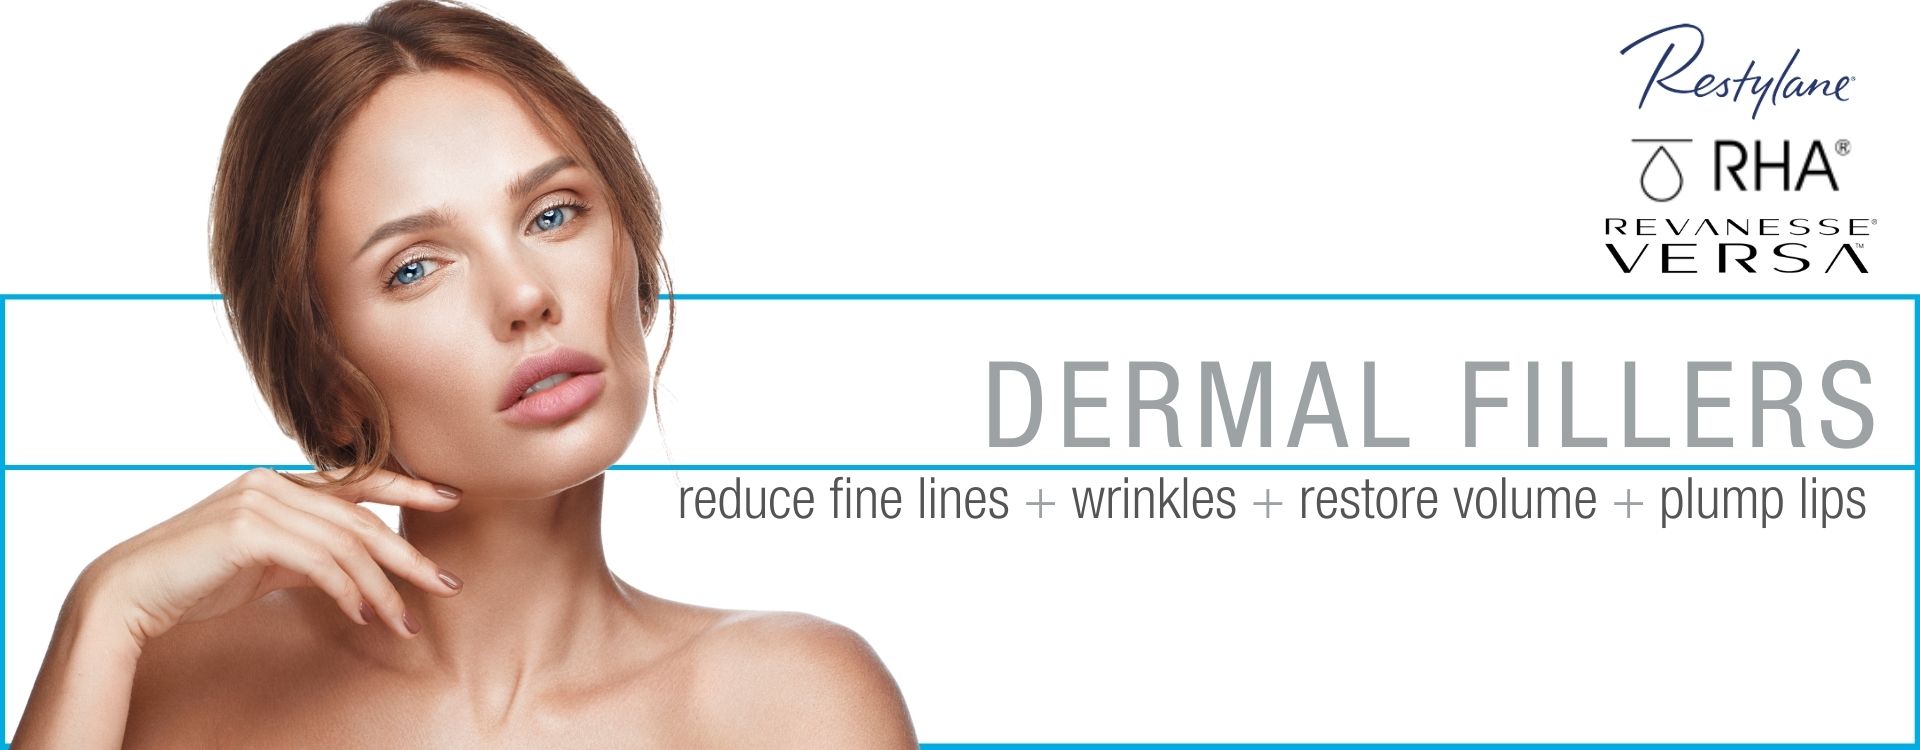 woman with beautiful face promoting dermal fillers treatment in Goldsboro, NC at ABM Wellness.